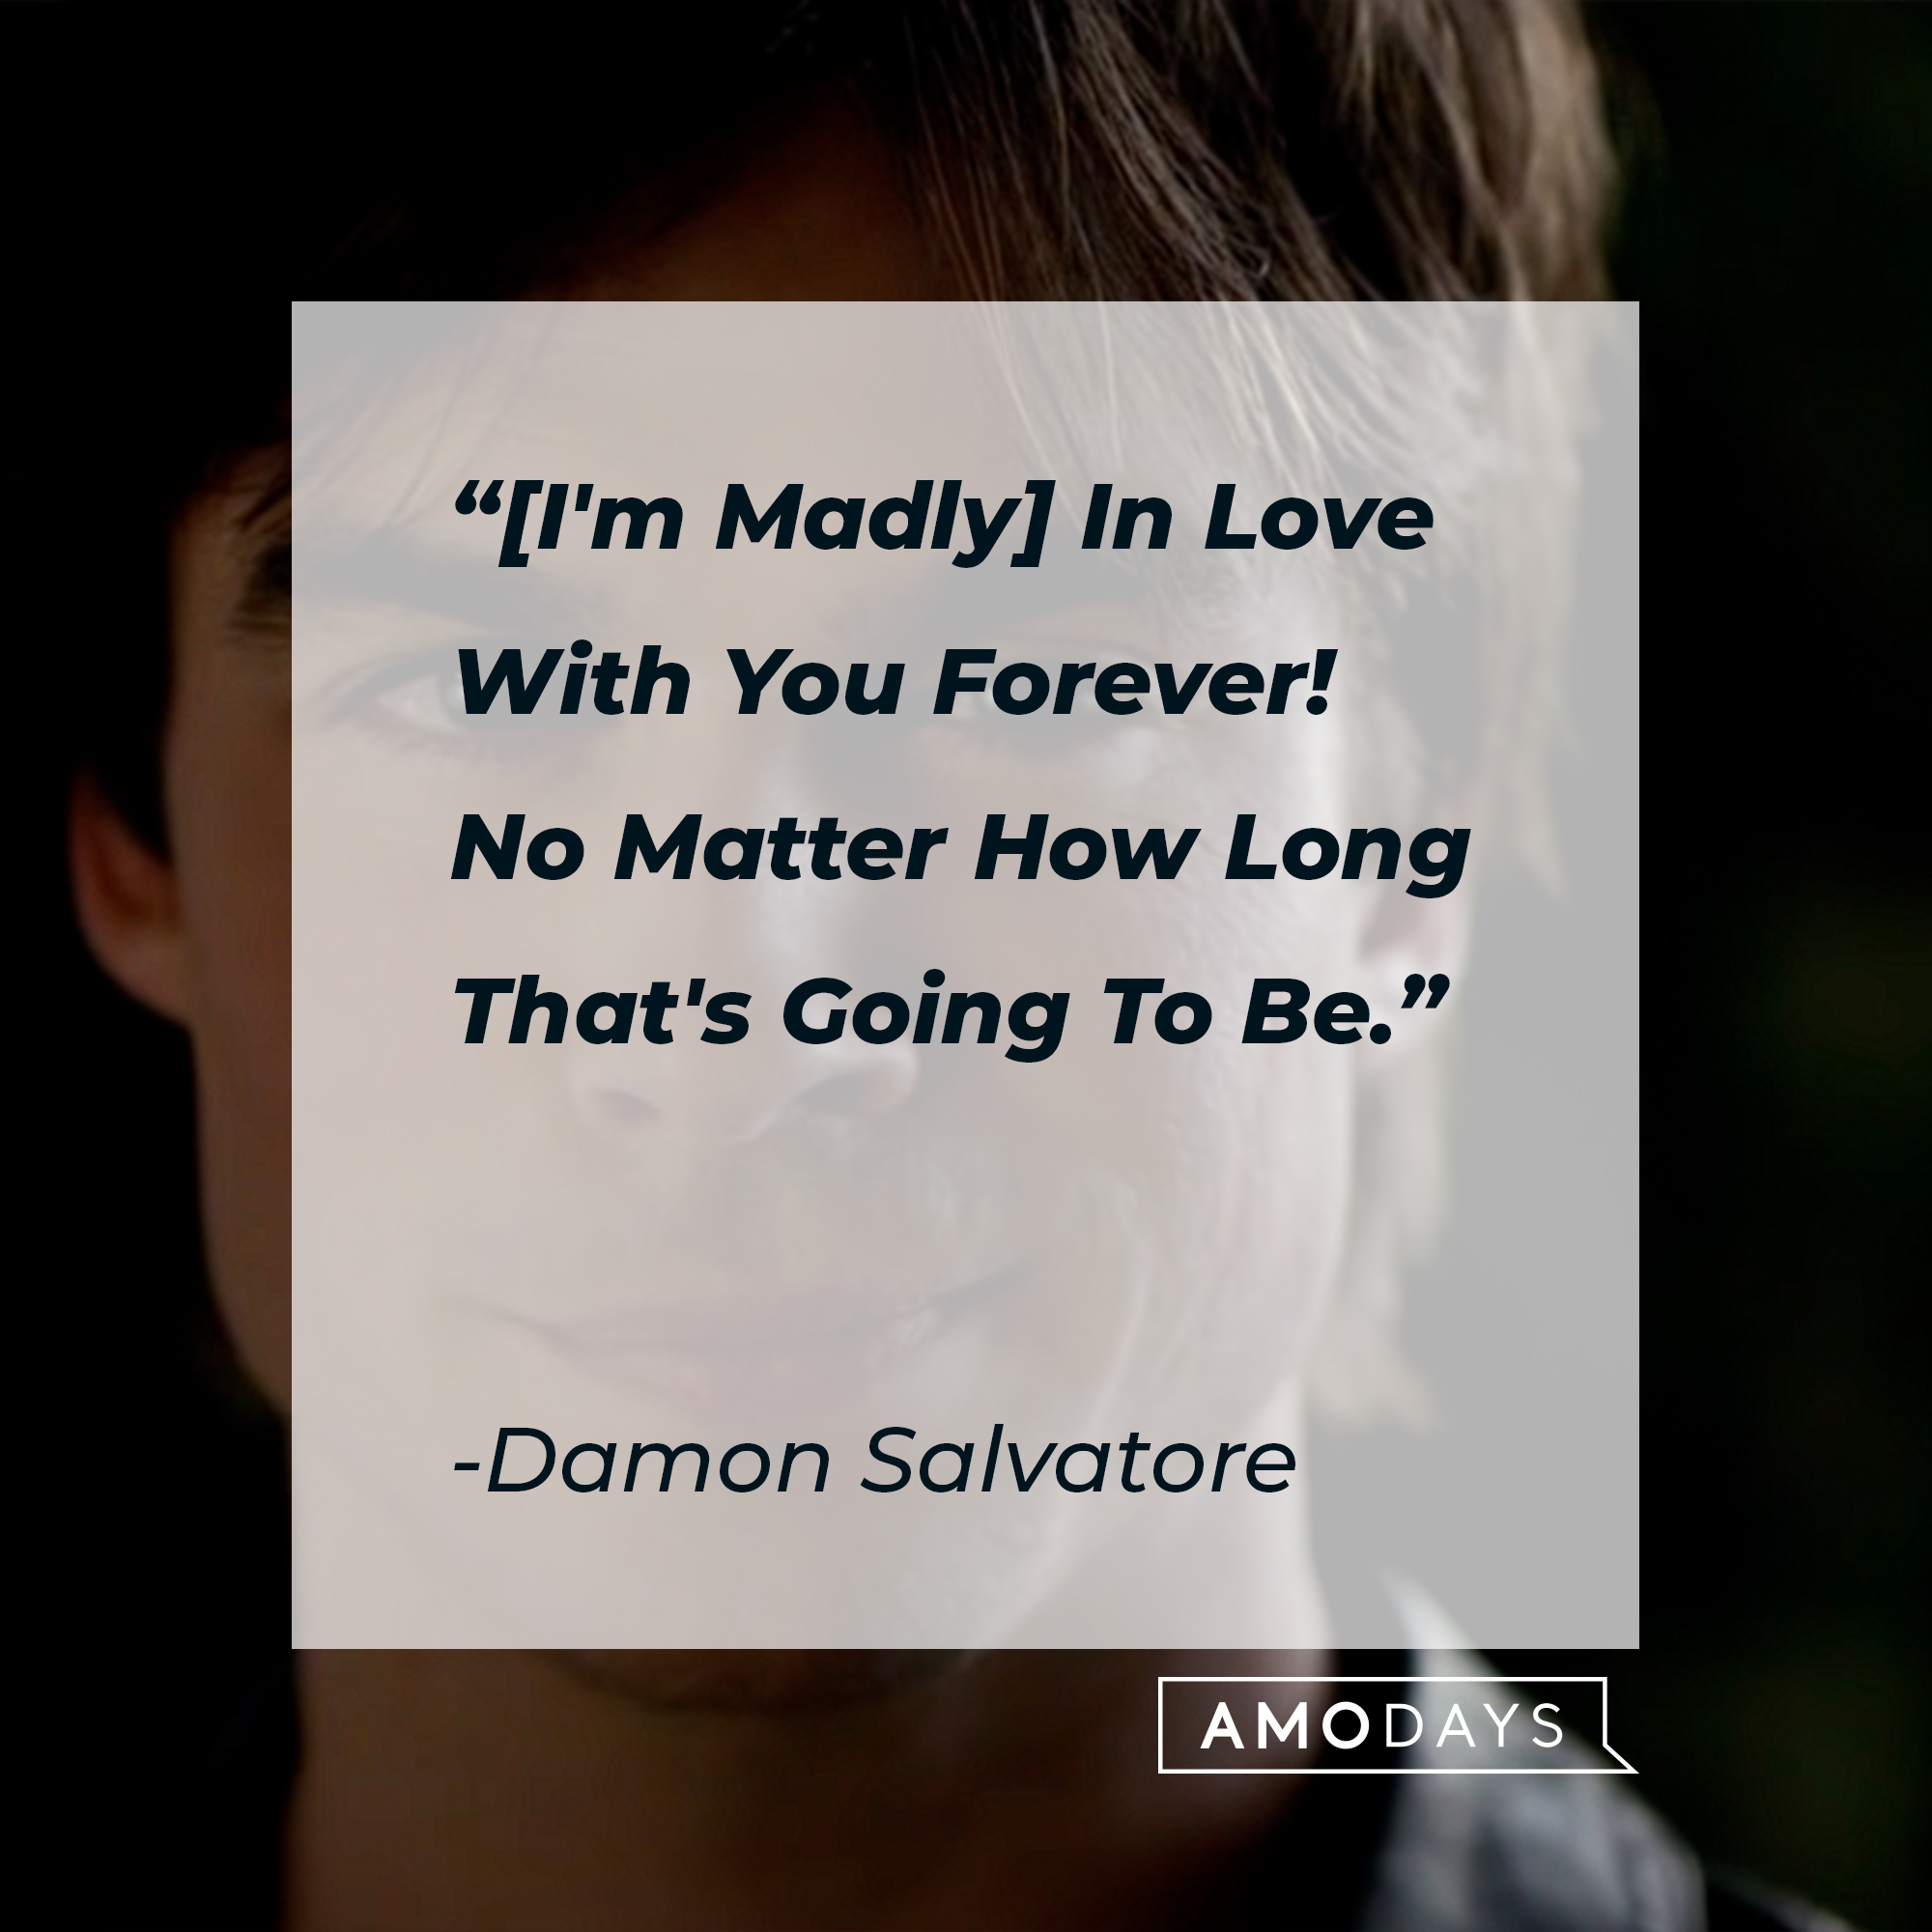 Damon Salvatore's quote: "[I'm Madly] In Love With You Forever! No Matter How Long That's Going To Be" | Source: youtube.com/stillwatchingnetflix